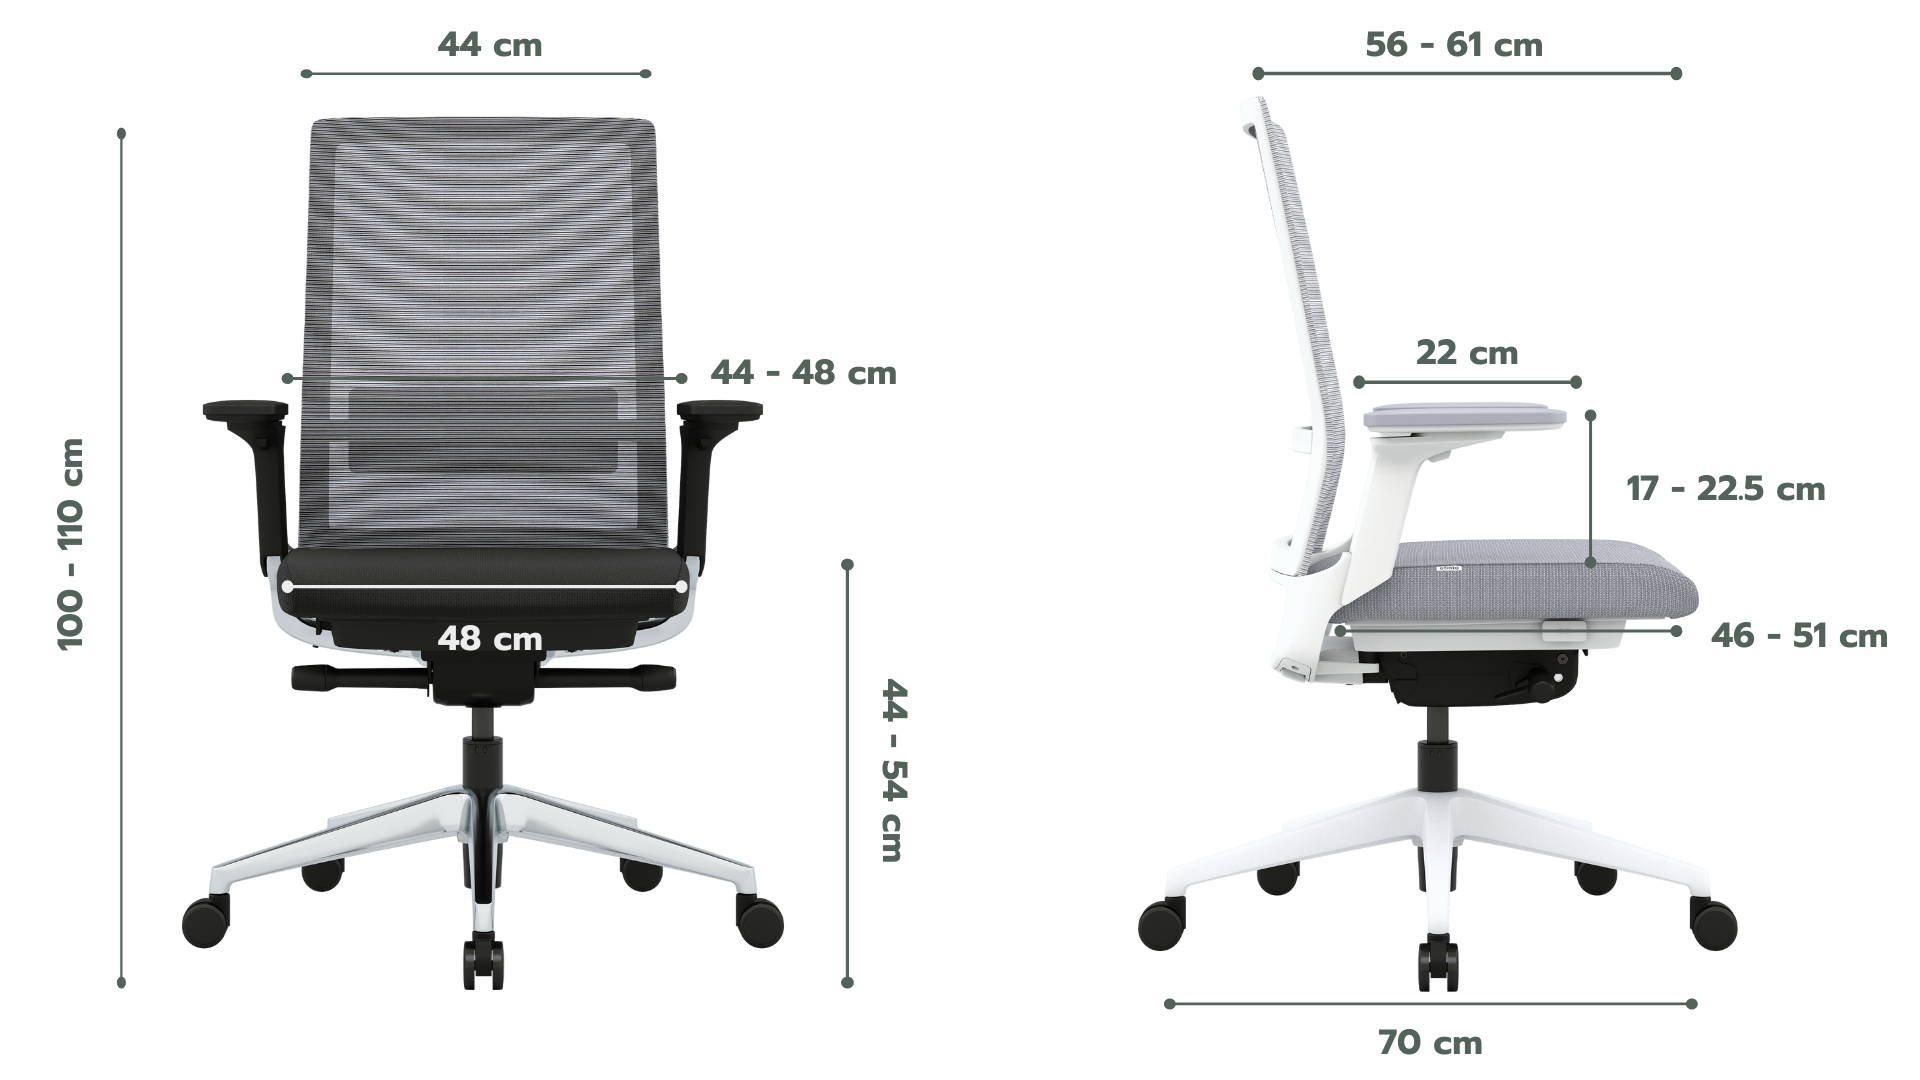 The mass of the ergonomic office chair ofinto Active